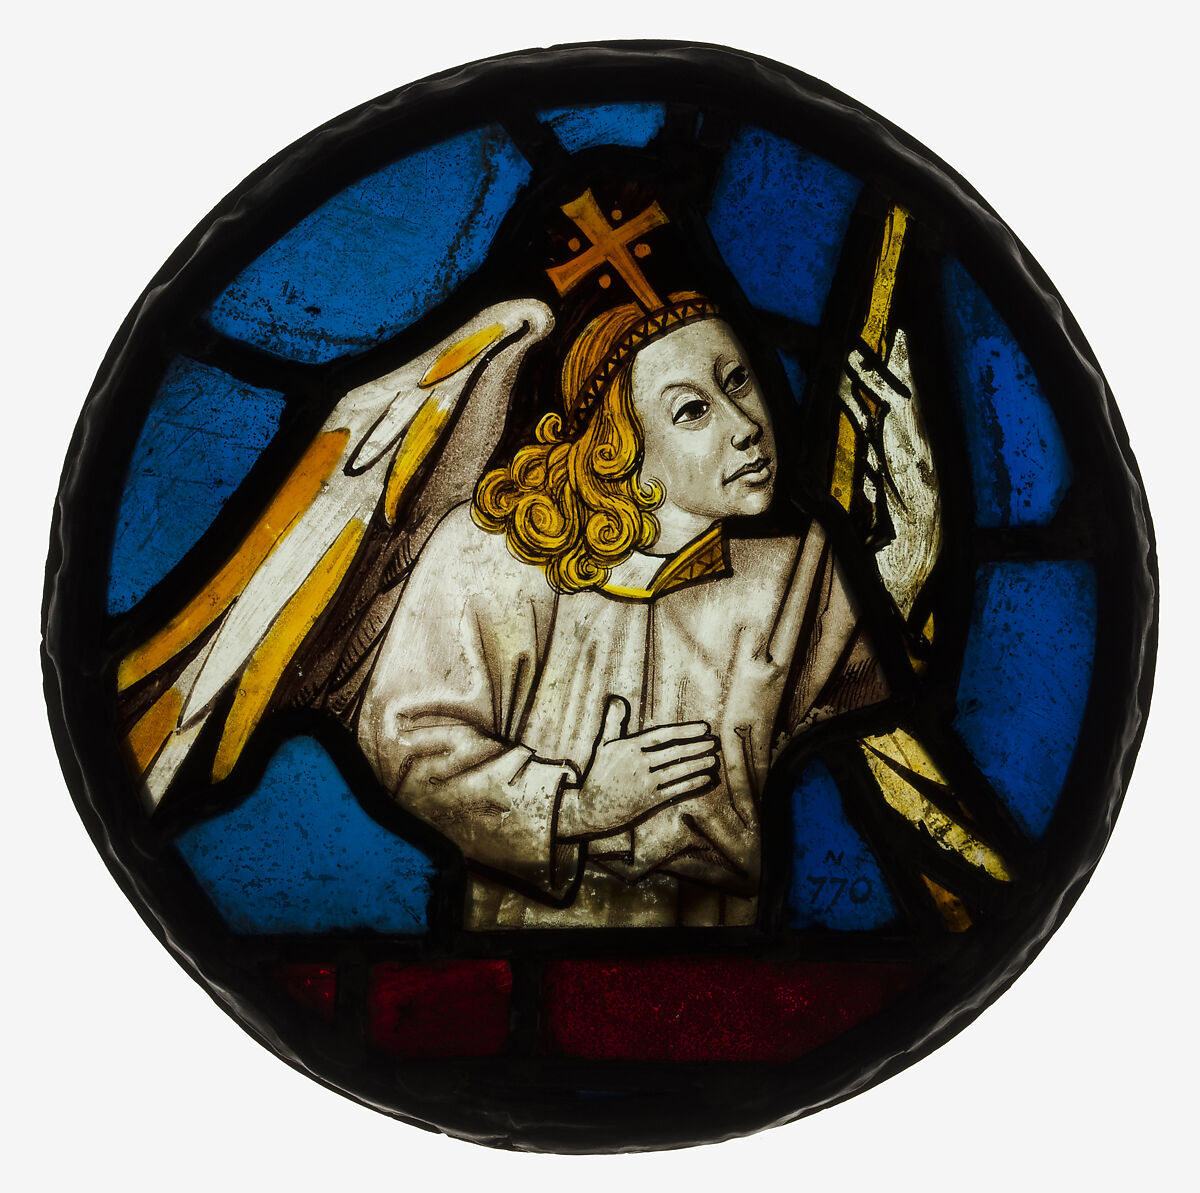 Angel, Pot-metal, colorless glass, and vitreous paint, British 